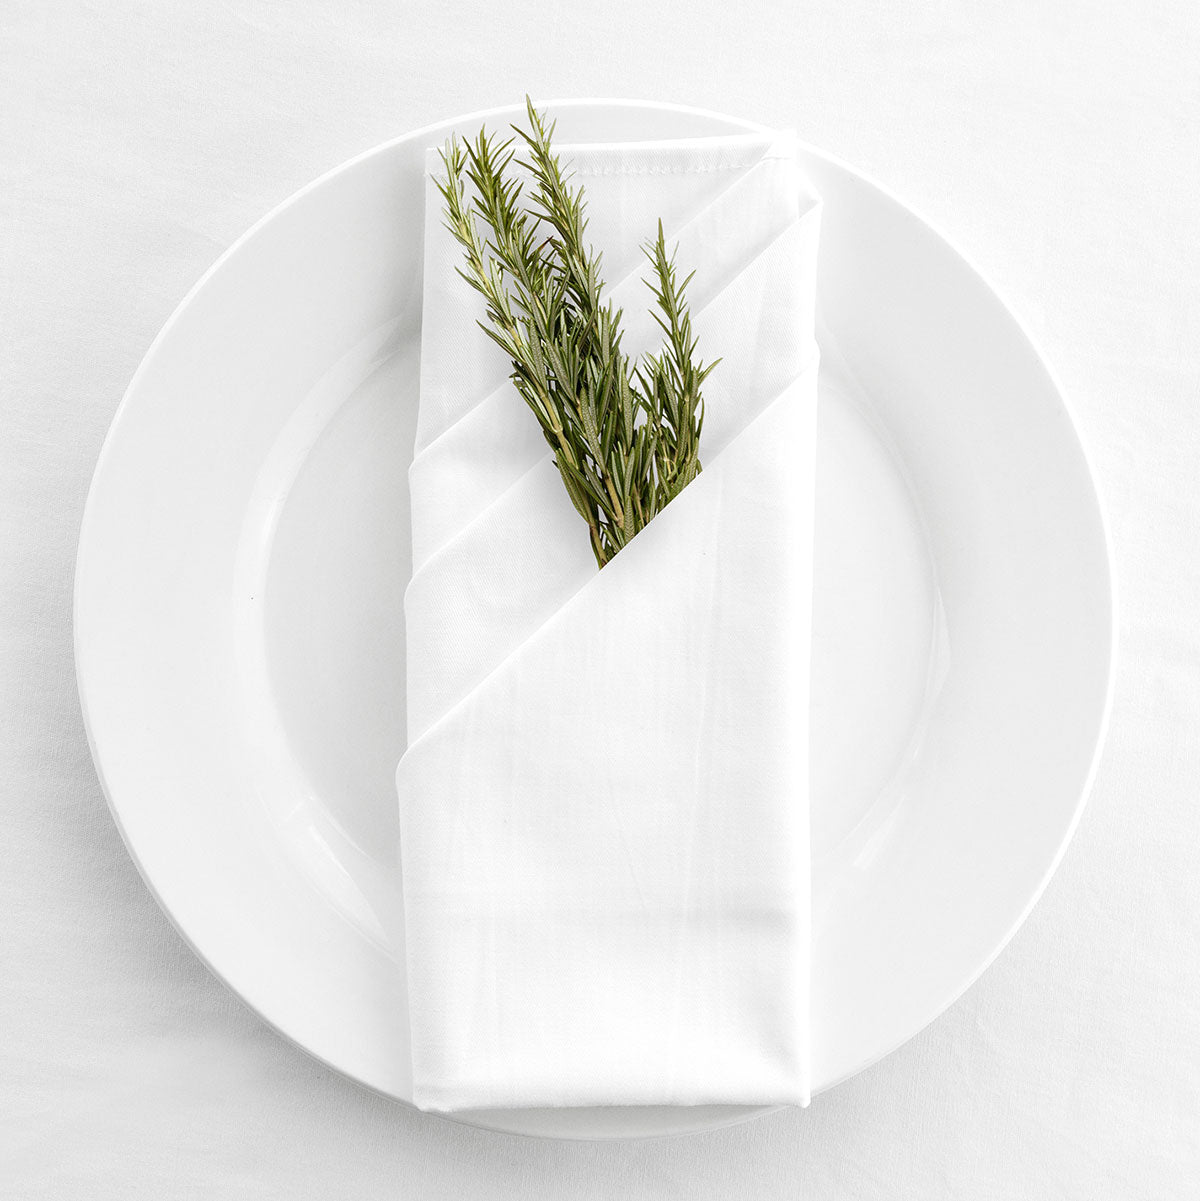 FiveSeasonStuff Pack of 10 Large White 100% Cotton Dinner Napkins, for Hotel, Restaurant, Home, BBQ, Picnics, Party, Wedding, Event, Buffet, Shower, Holiday (48cm x 48cm/18.9 x 18.9 inches)